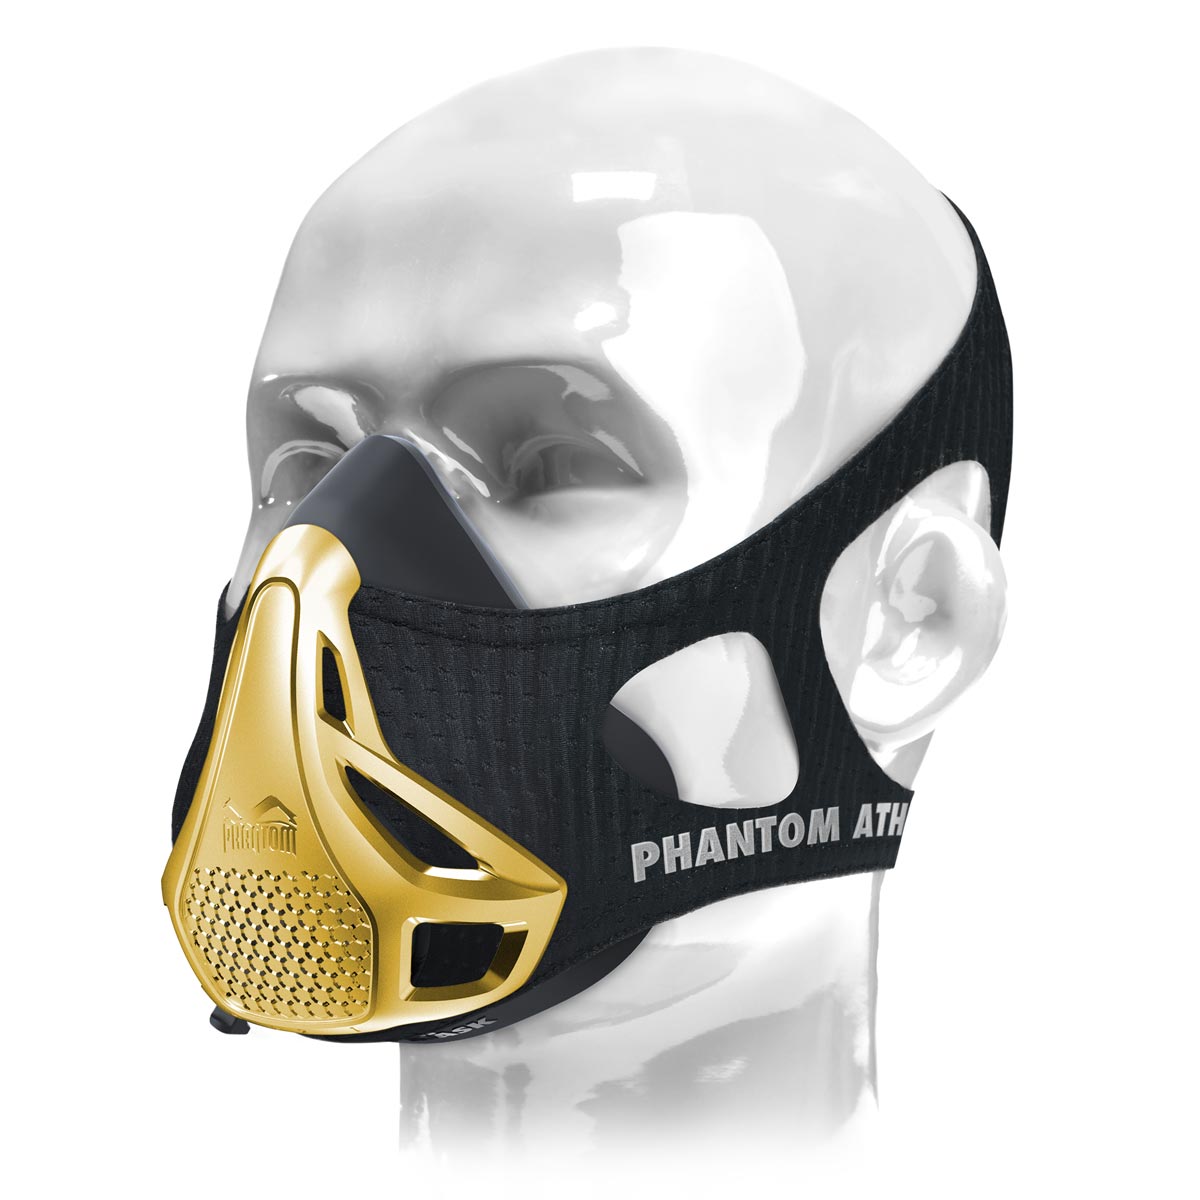 The Phantom training mask. The original. Patented and awarded to take your fitness to the next level. Now in a limited gold edition.